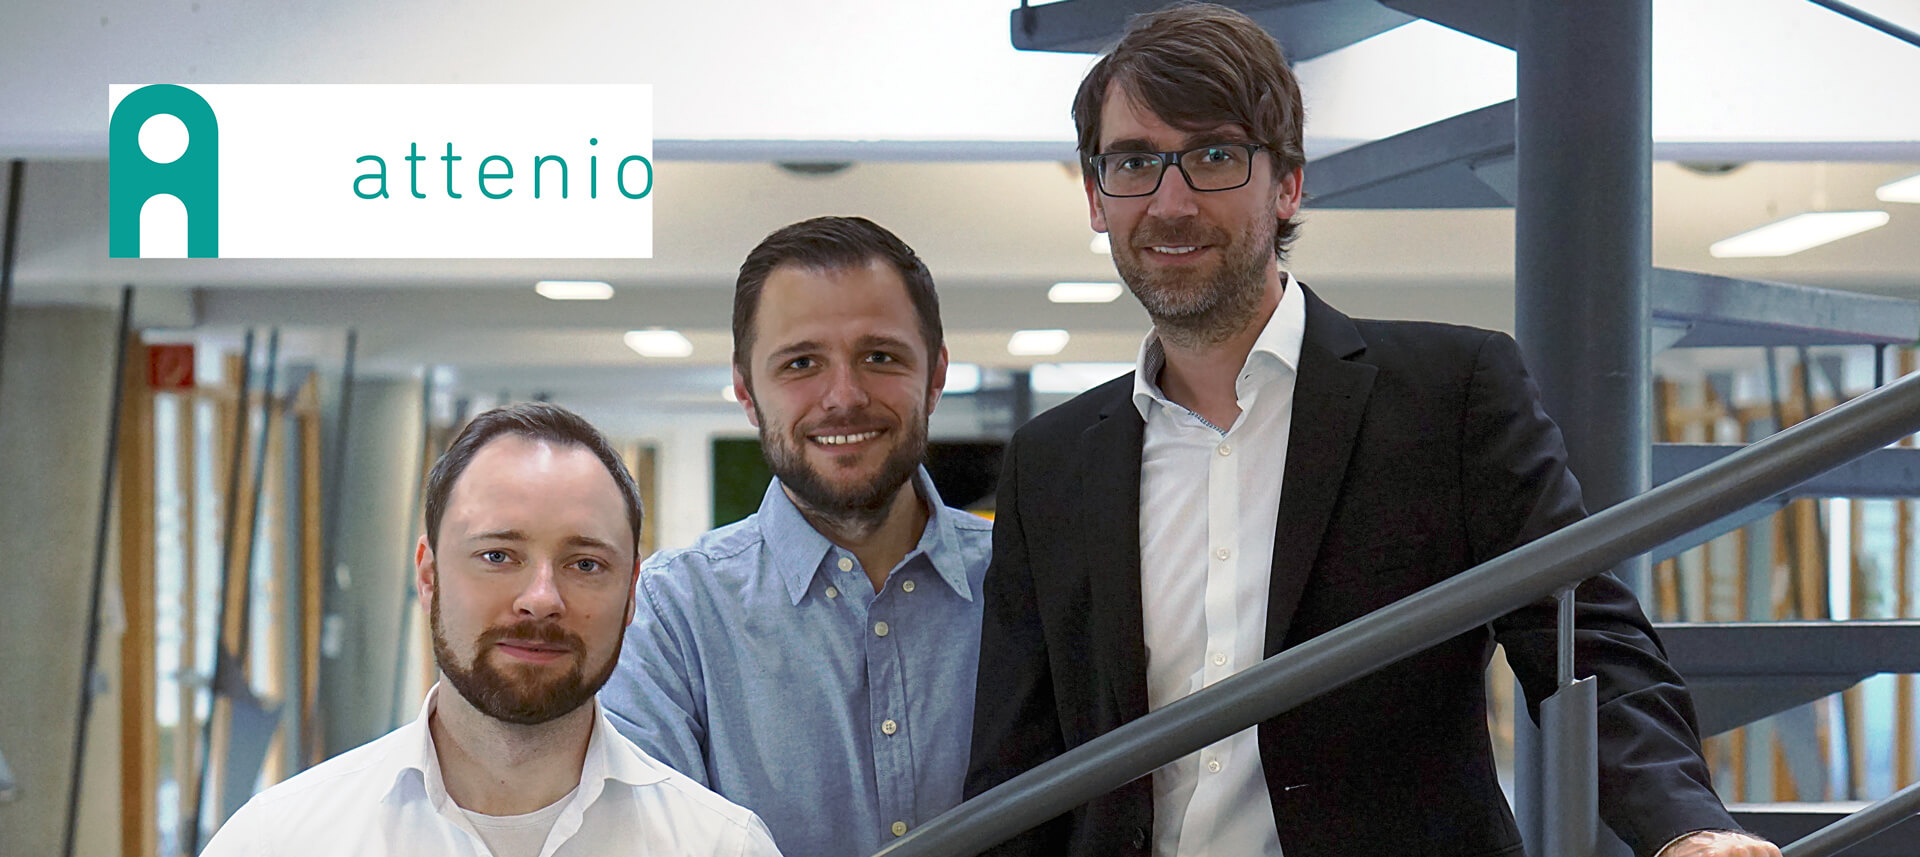 attenio starts the digital transformation in industrial assembly with 1.1 mio € seed funding.